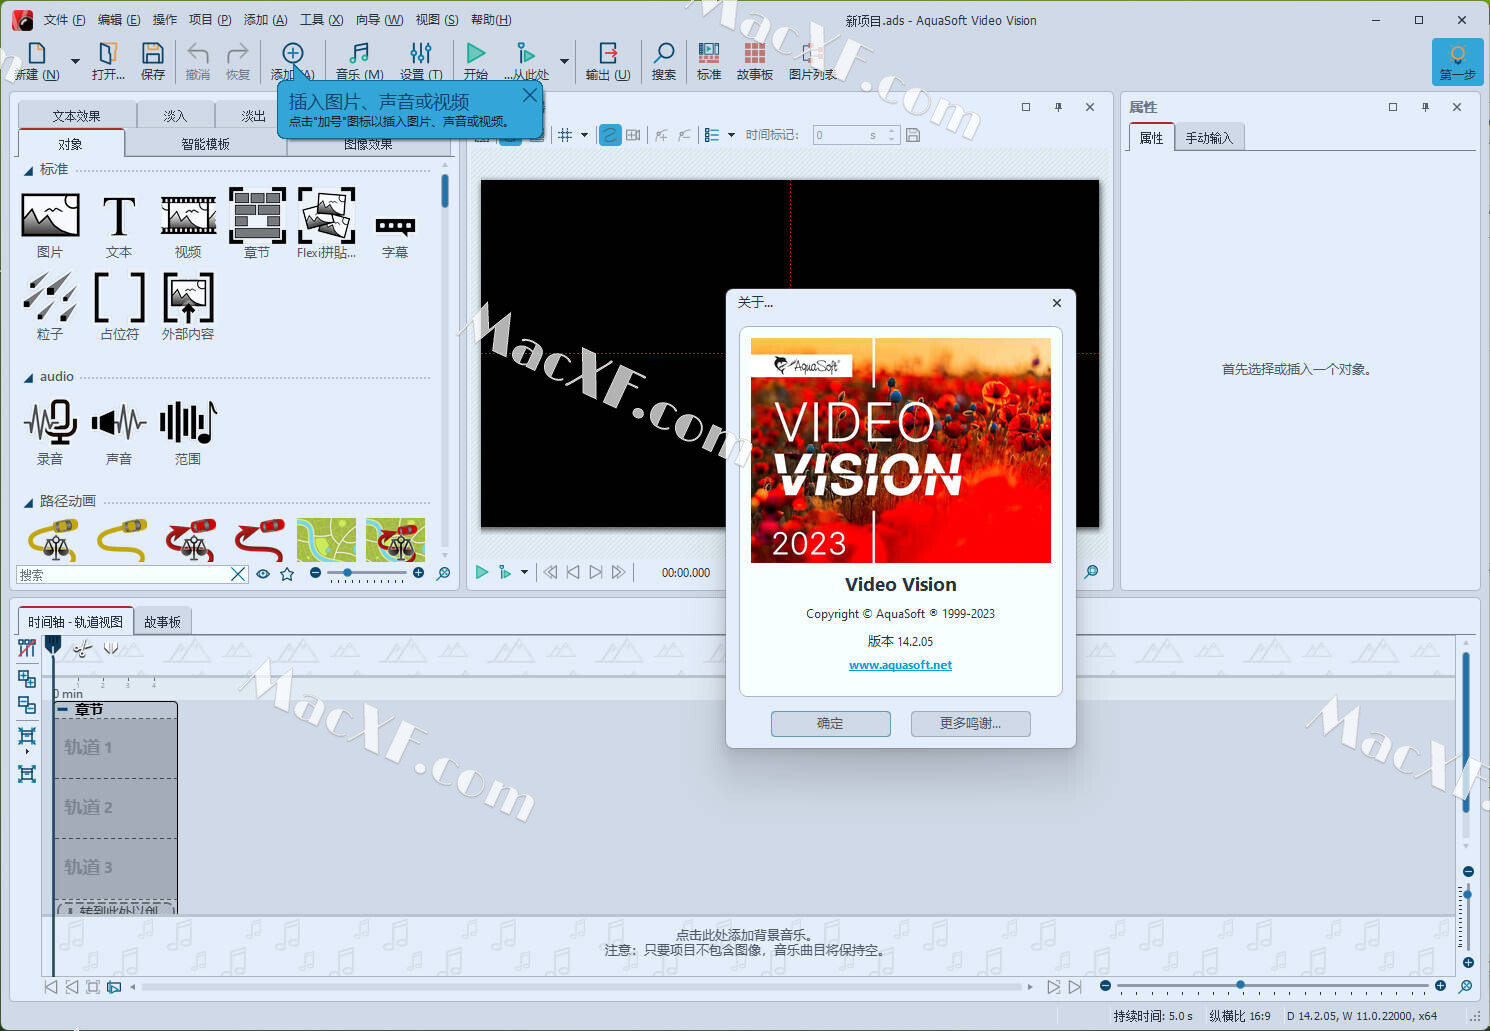 AquaSoft Photo Vision 14.2.13 download the last version for iphone